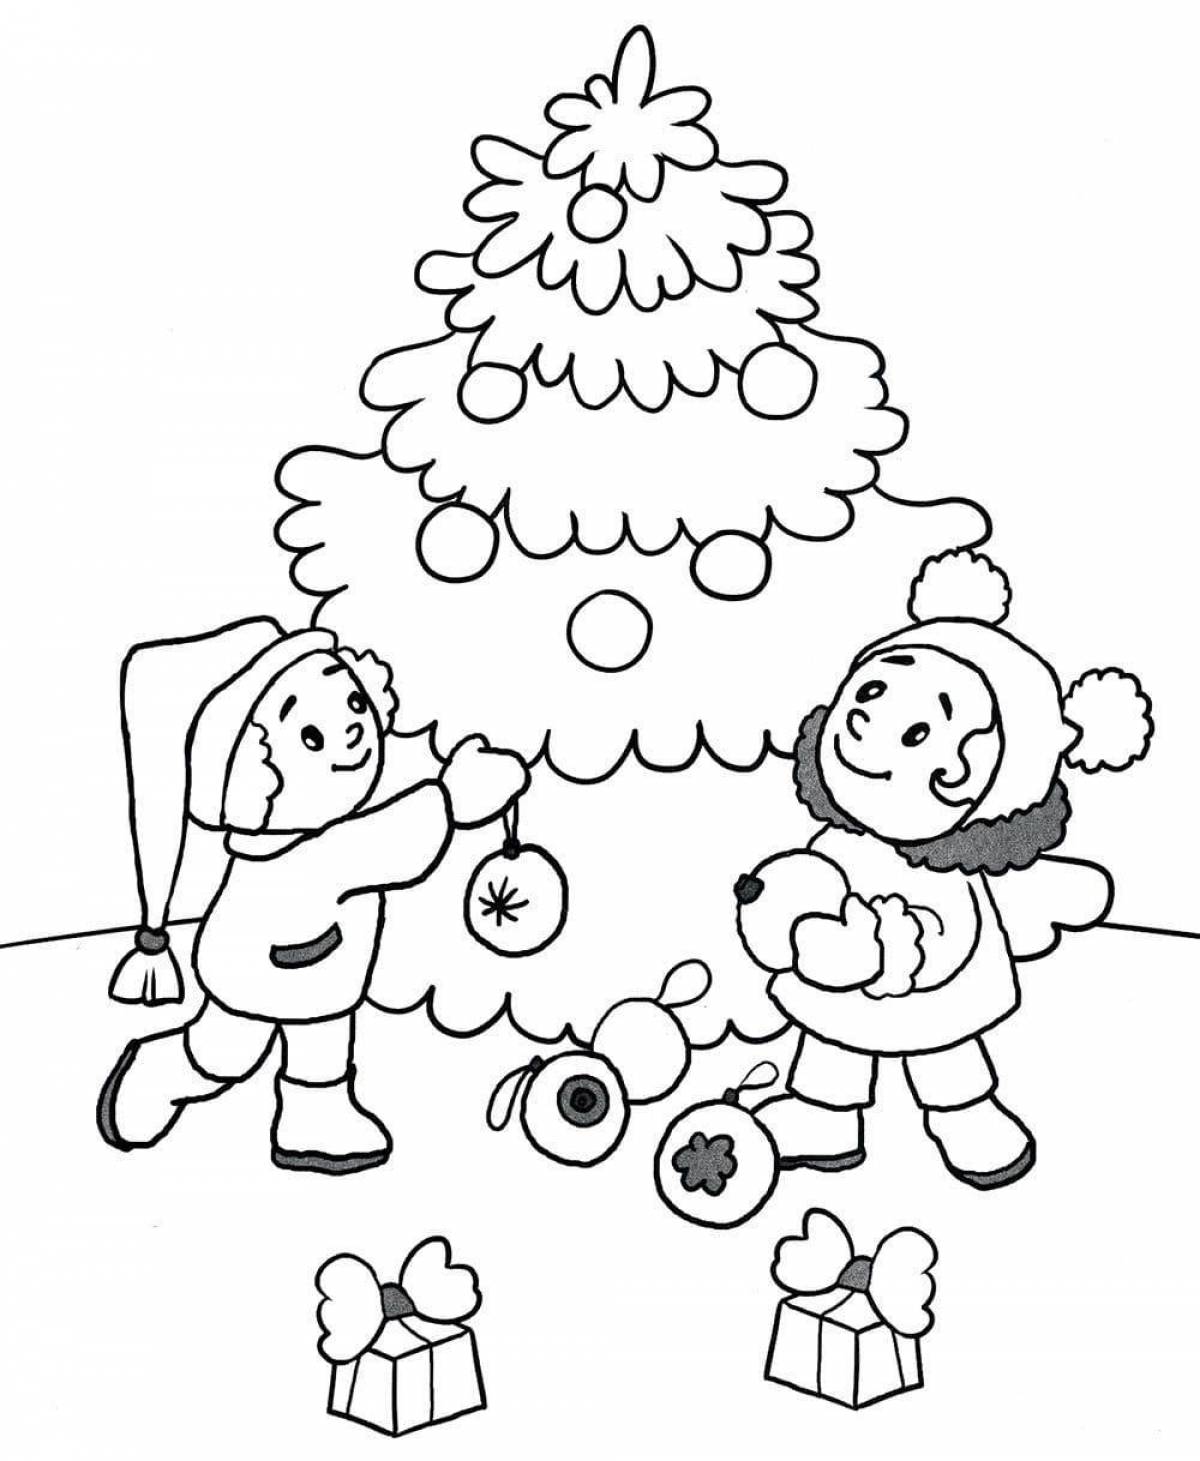 Colouring bright Christmas tree for preschoolers 2-3 years old